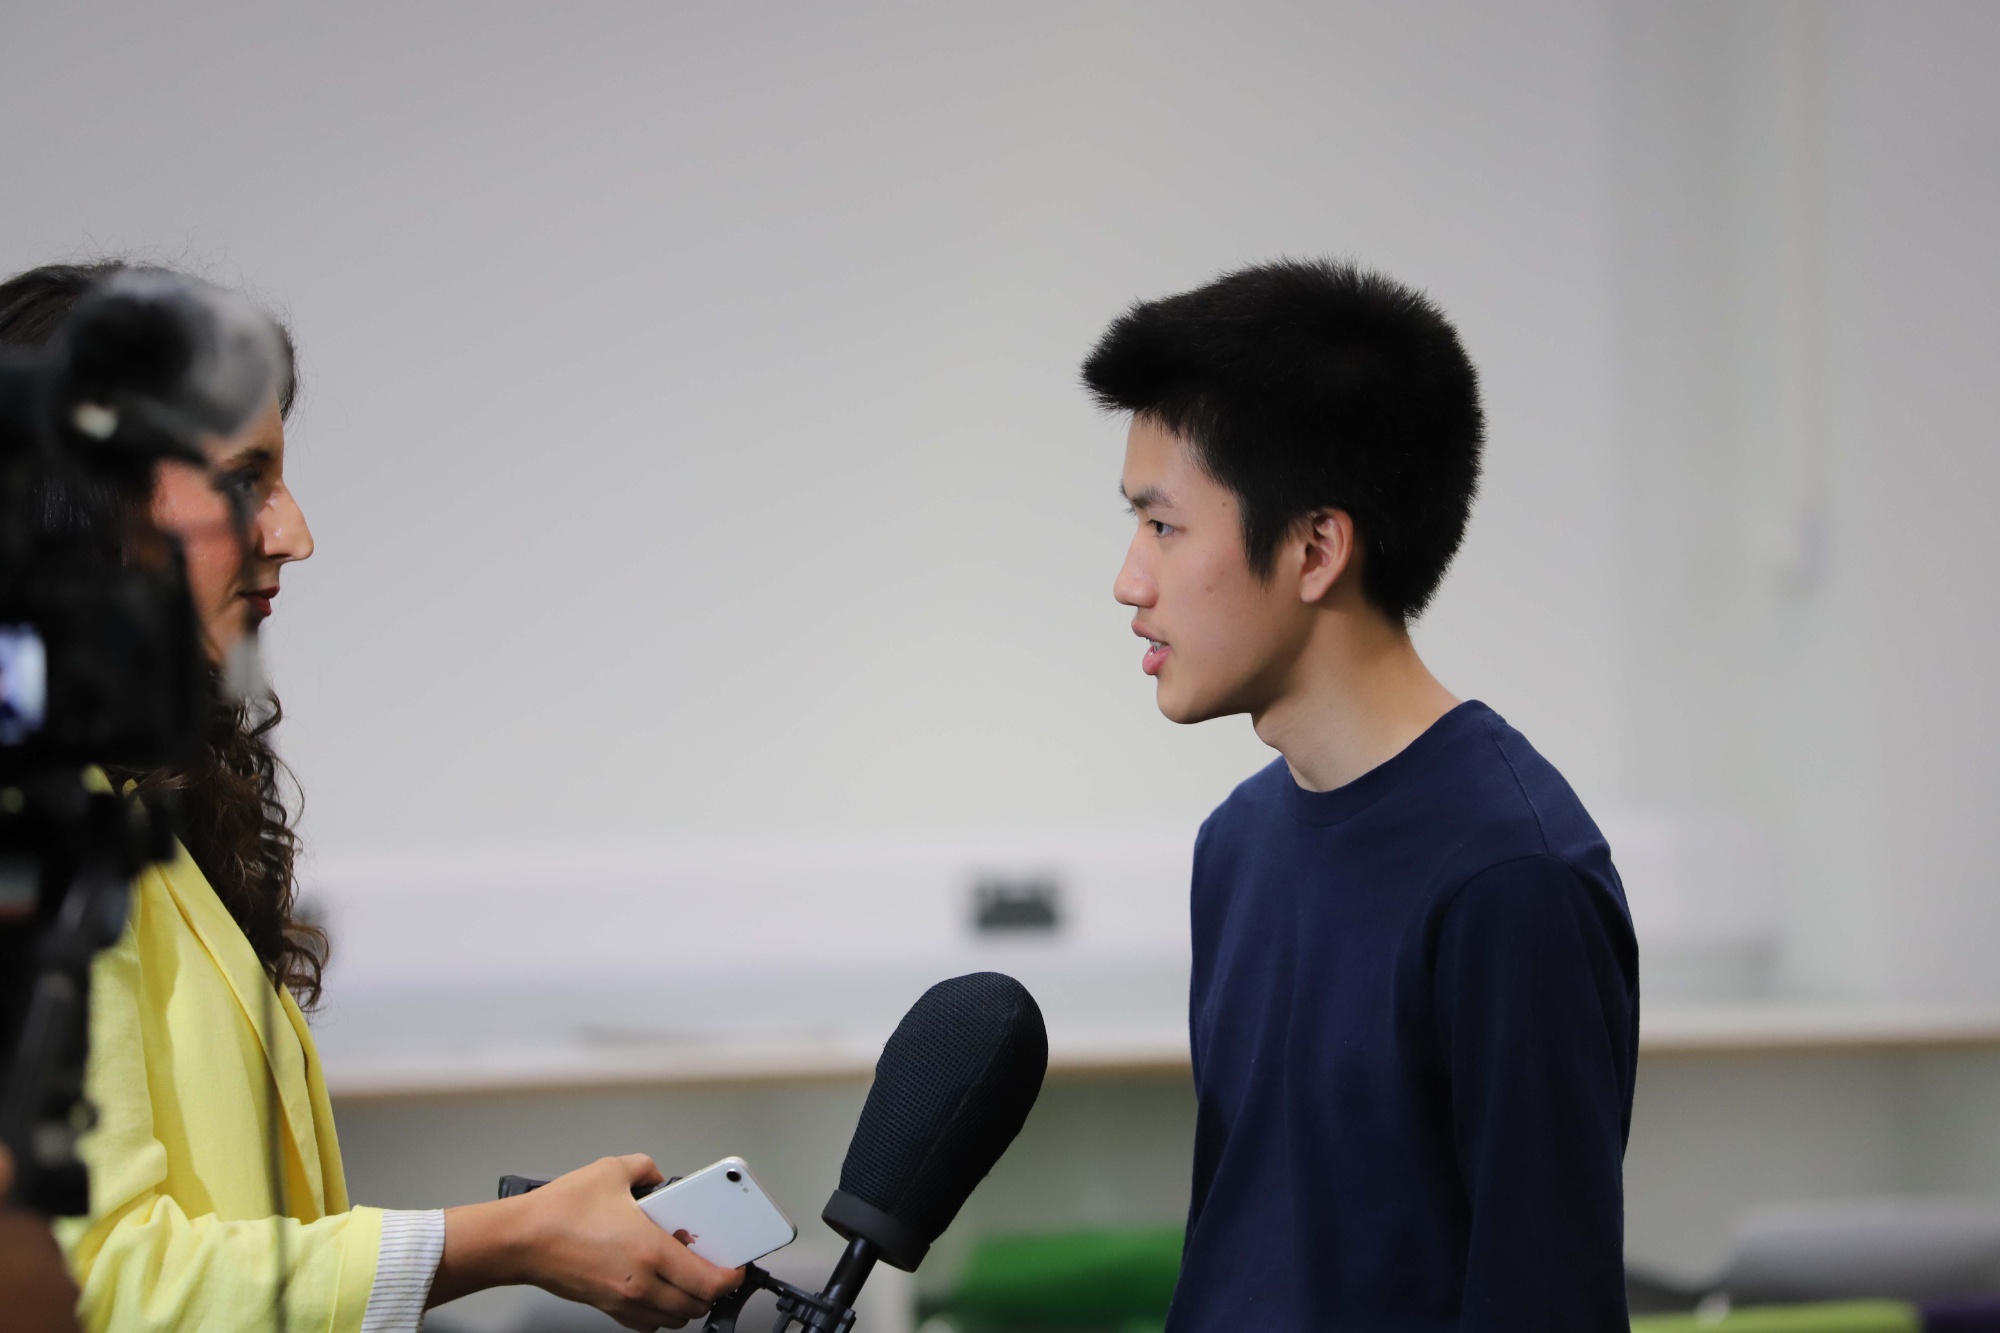 Phuk Tao is interviewed by Sky News live on results day and discussed his Level 4 Data Analyst apprenticeship with Lloyds Banking Group